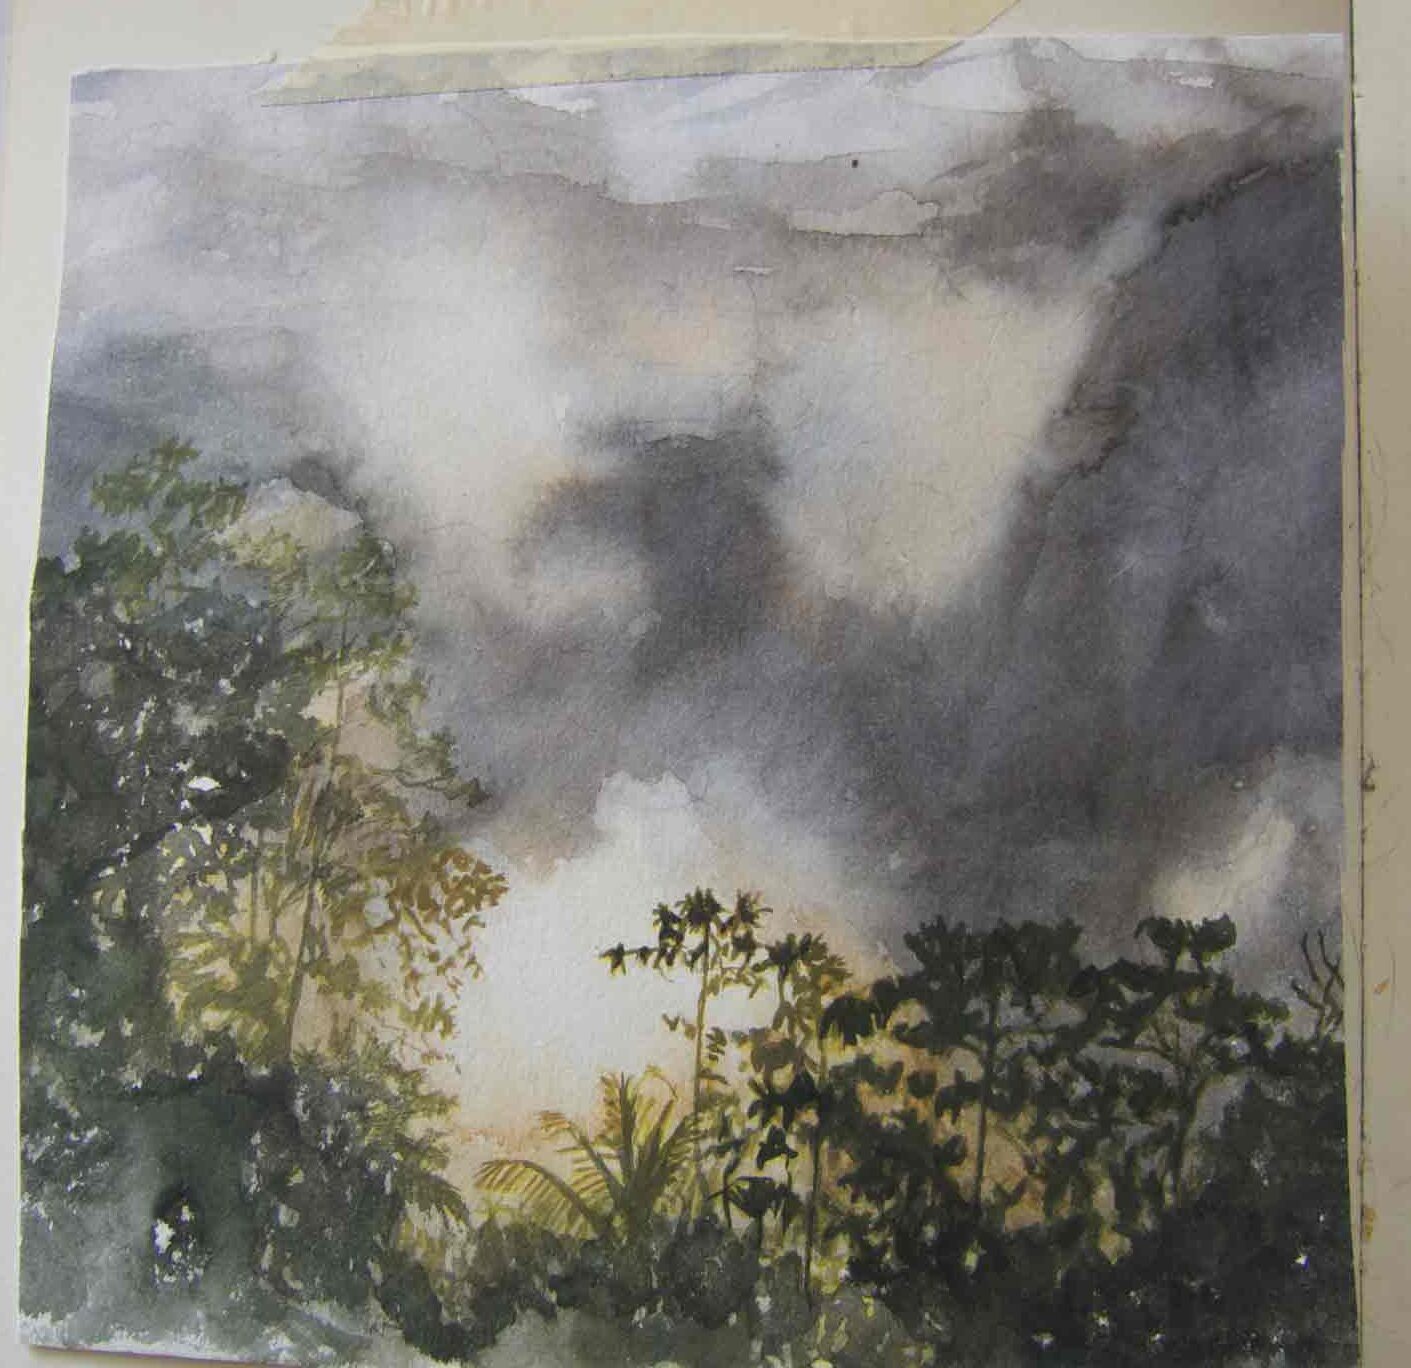 Sketch Of The Forest In Sri Lanka